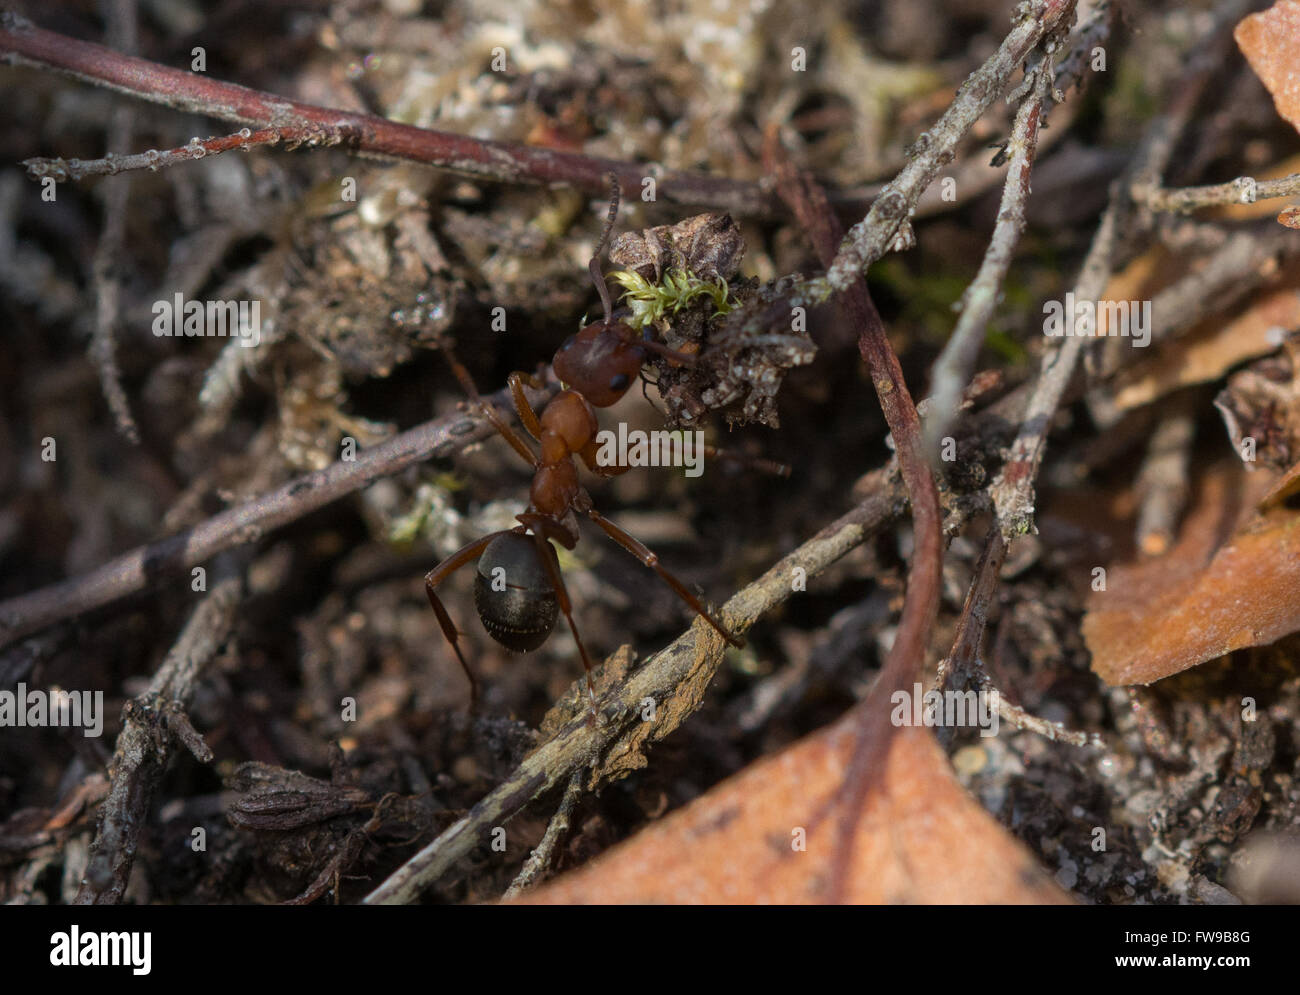 Close-up of Southern wood ant (Formica rufa) carrying vegetation on a Surrey heathland in England Stock Photo